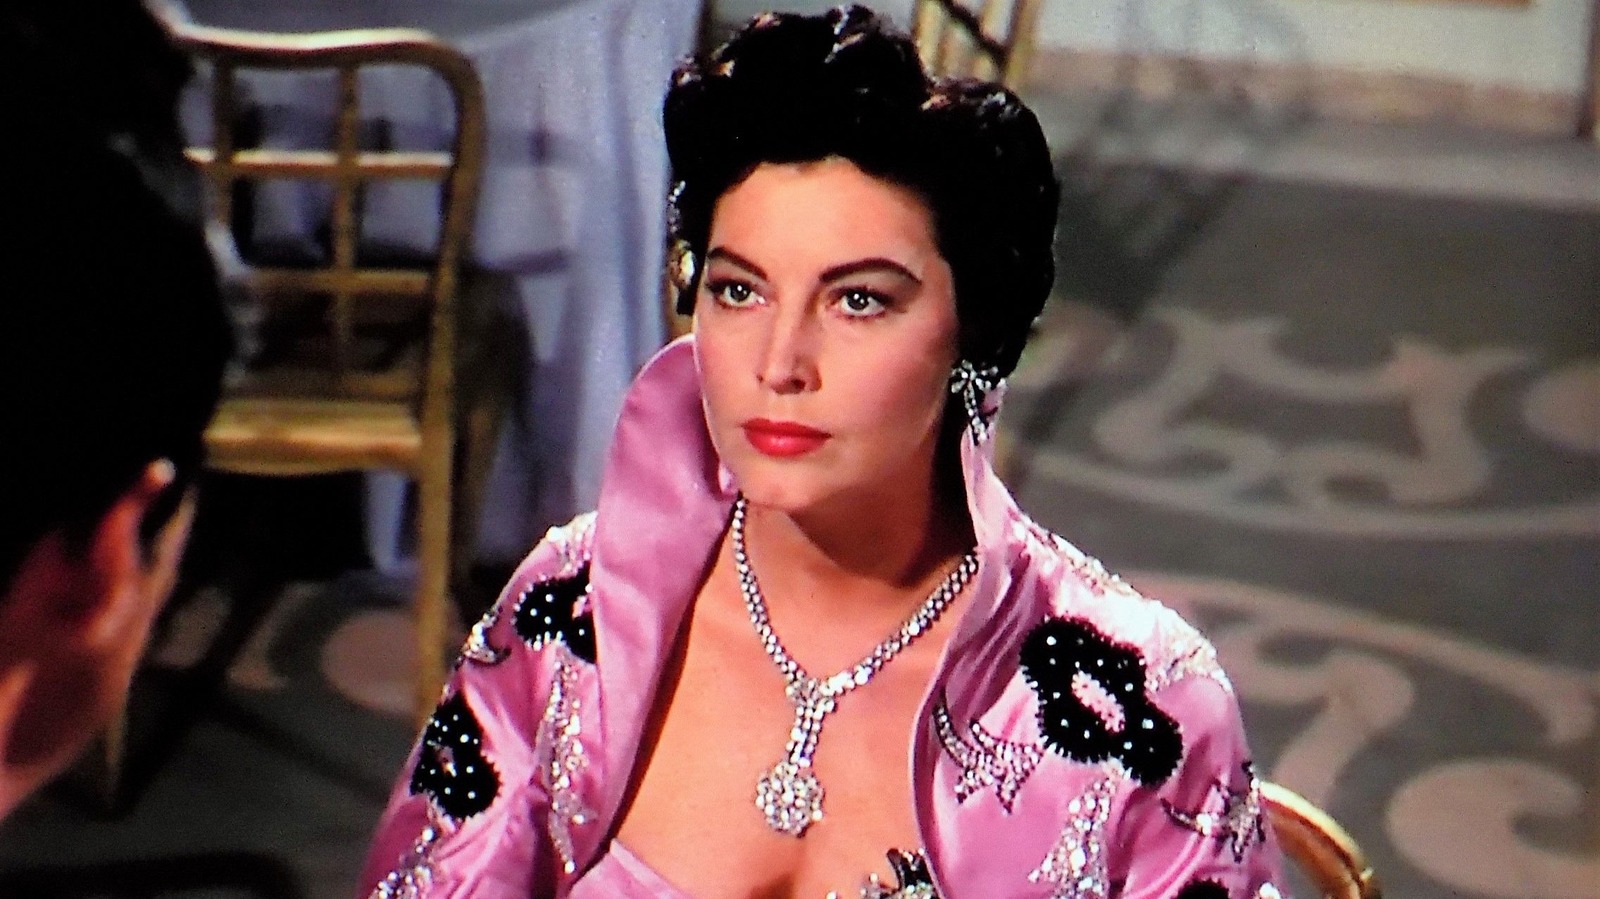 Barefoot Contessa Proves Hollywood Doesn’t Know What To Do With Ava Gardner